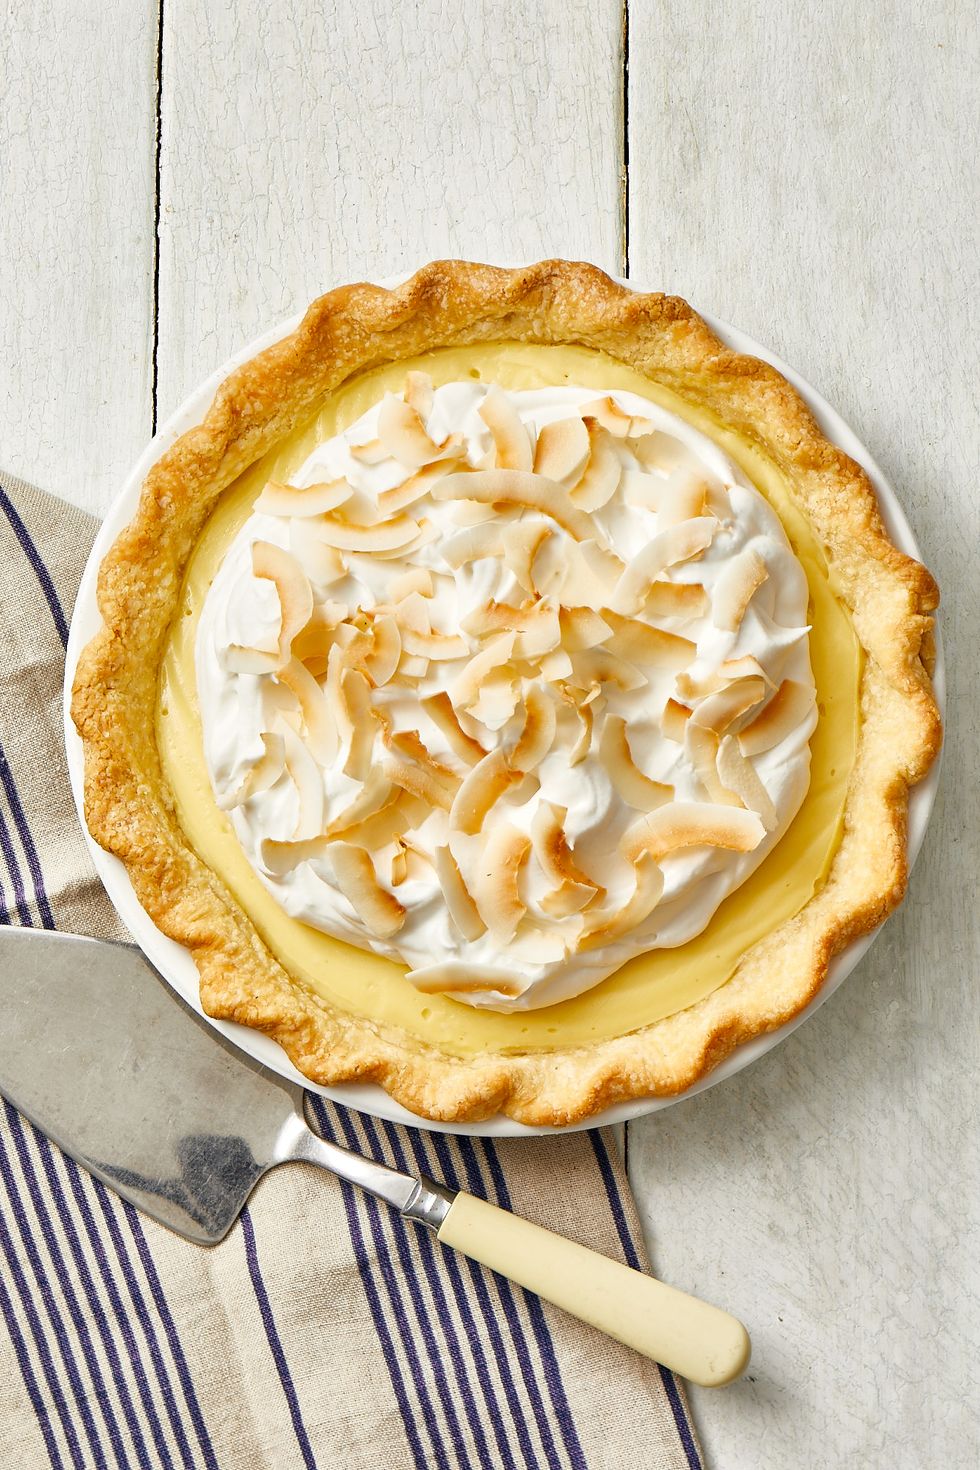 coconut cream pie on a wooden table, next to a serving knife